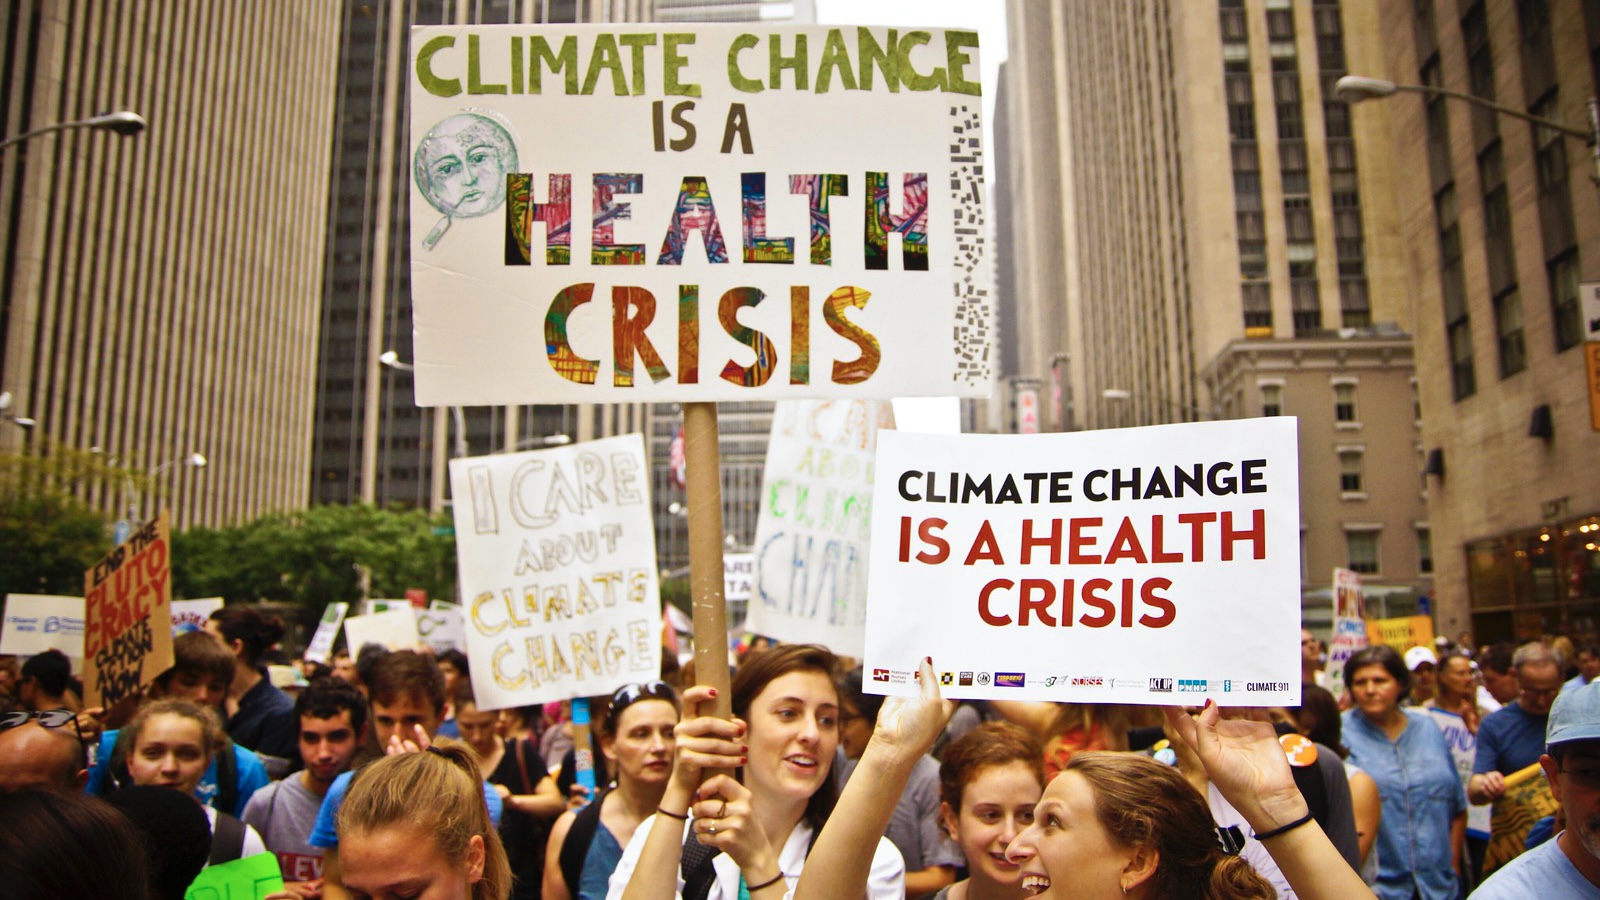 Fellowship helps doctors and nurses take action on climate change